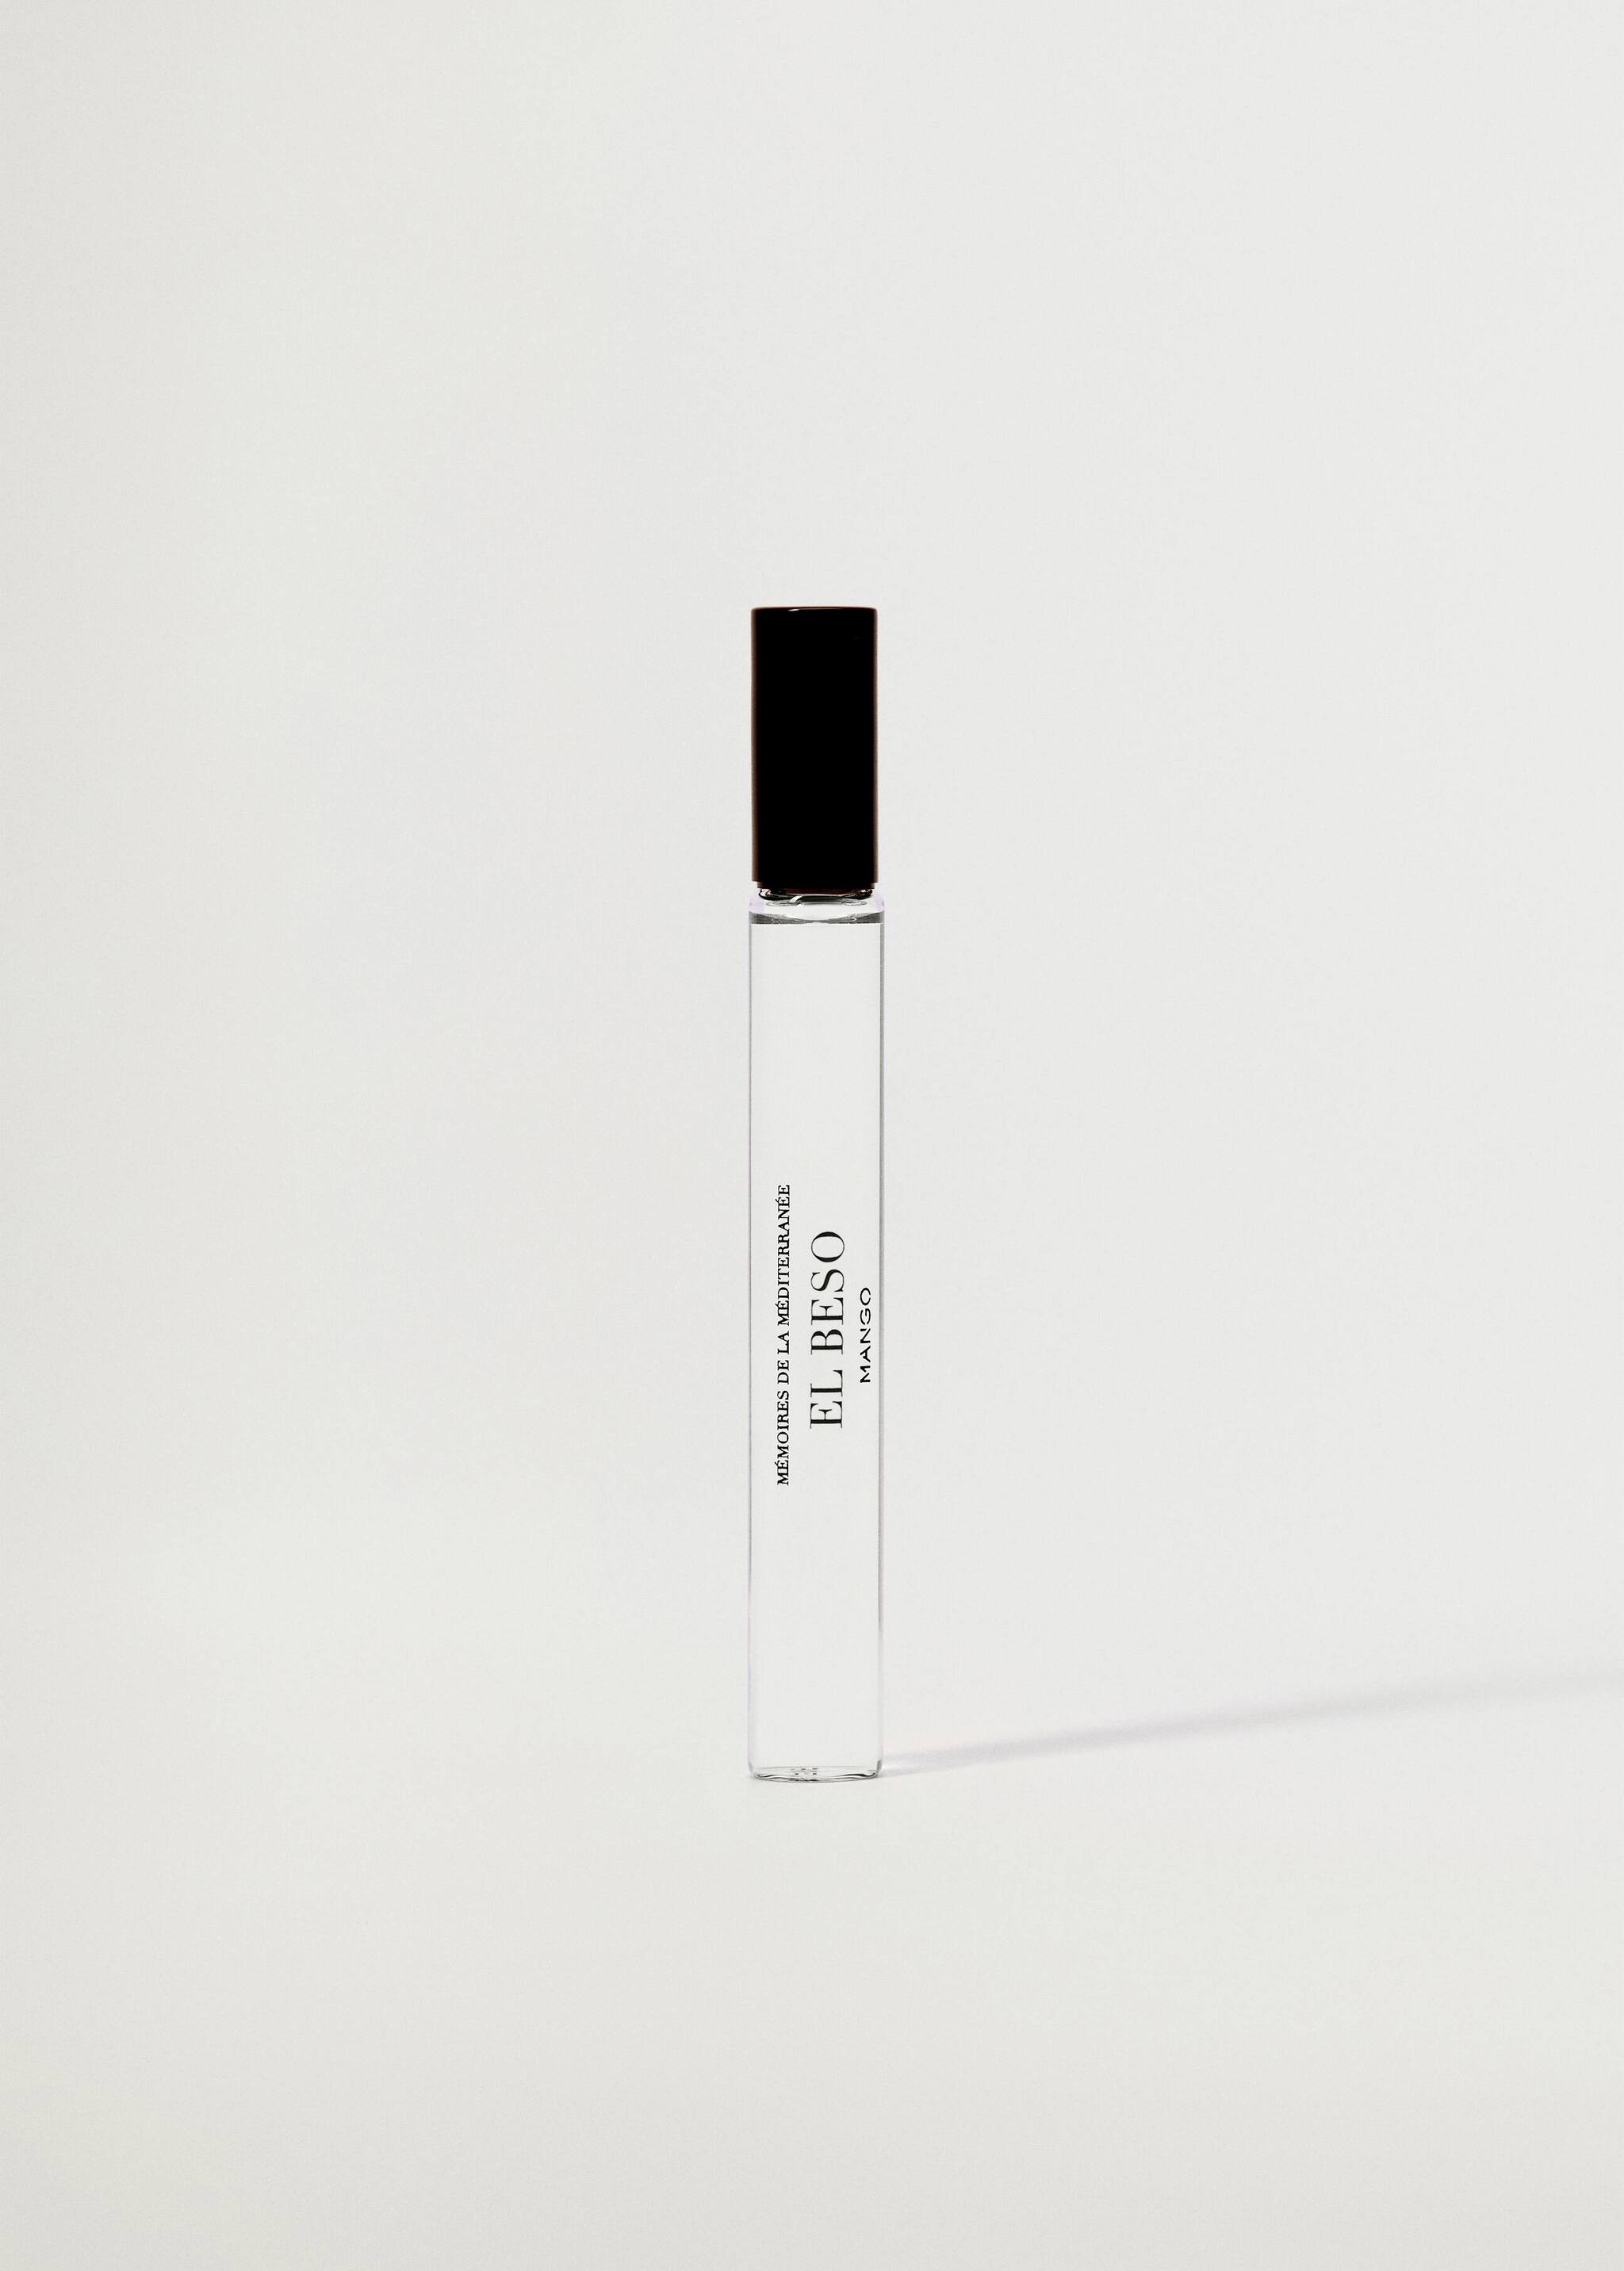 El Beso Fragrance 10 ml - Article without model